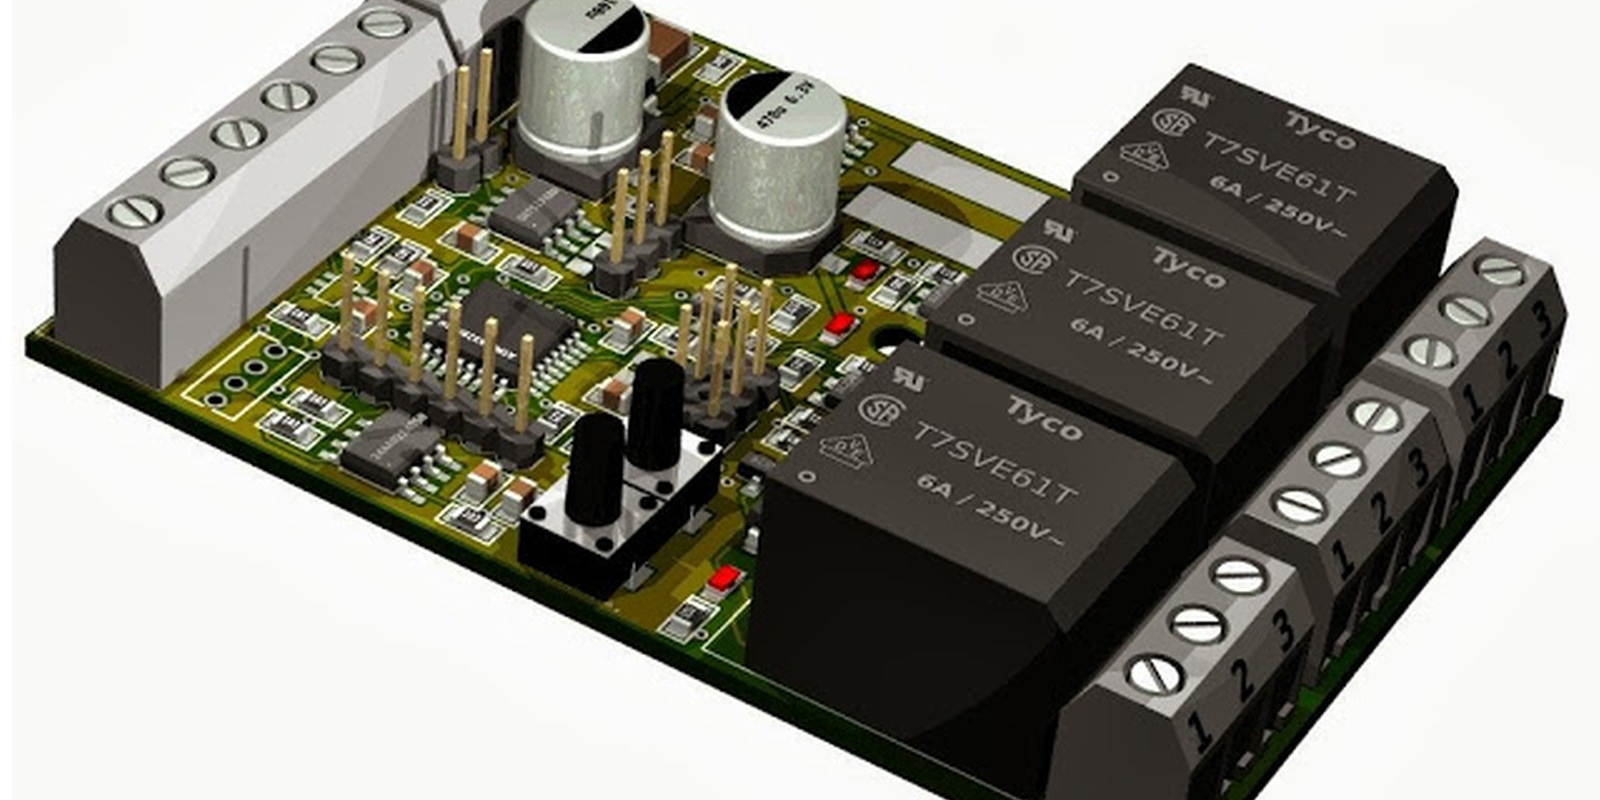 3D Rendering for the new RS-485 boards